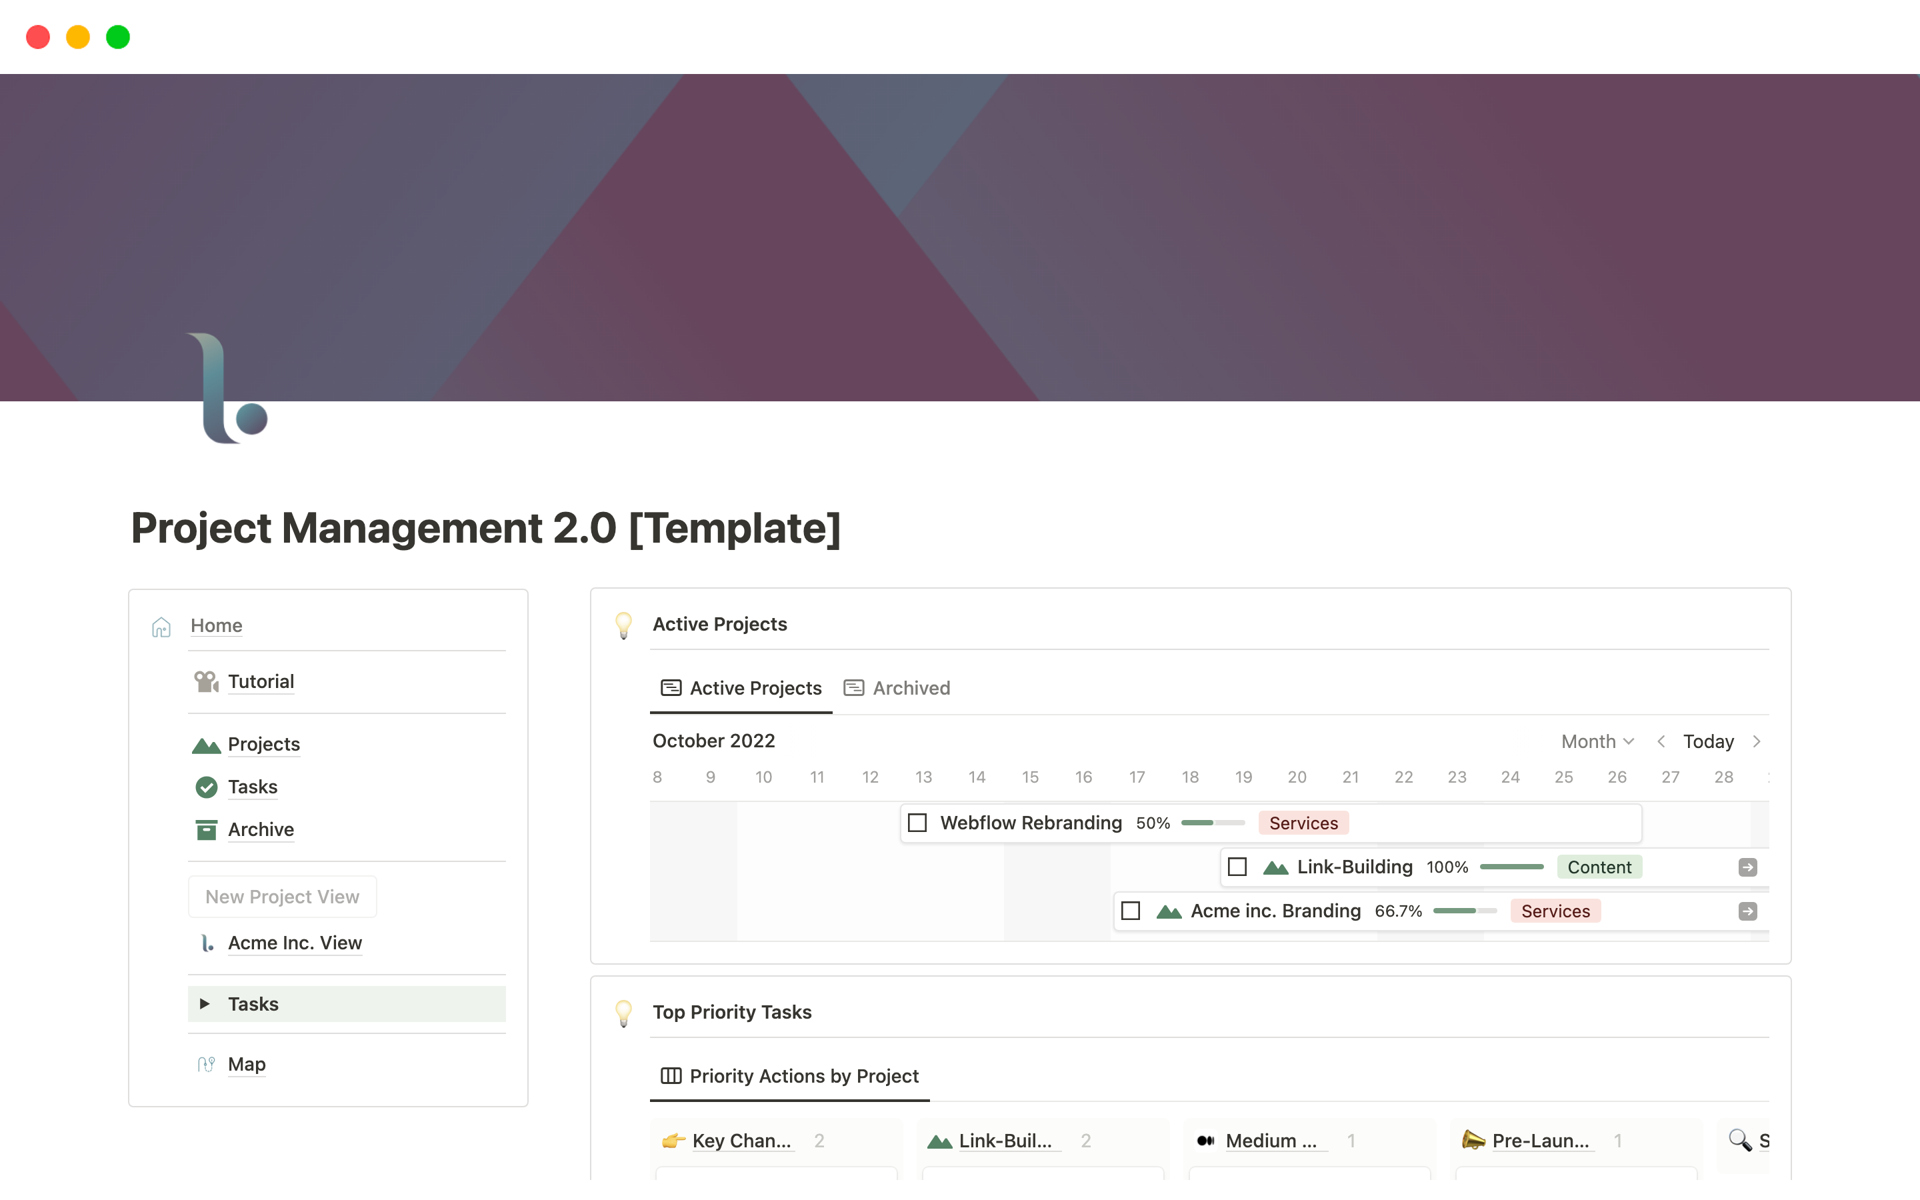 Leverage some of the most basic superpowers of related Notion databases with this simple project management template.